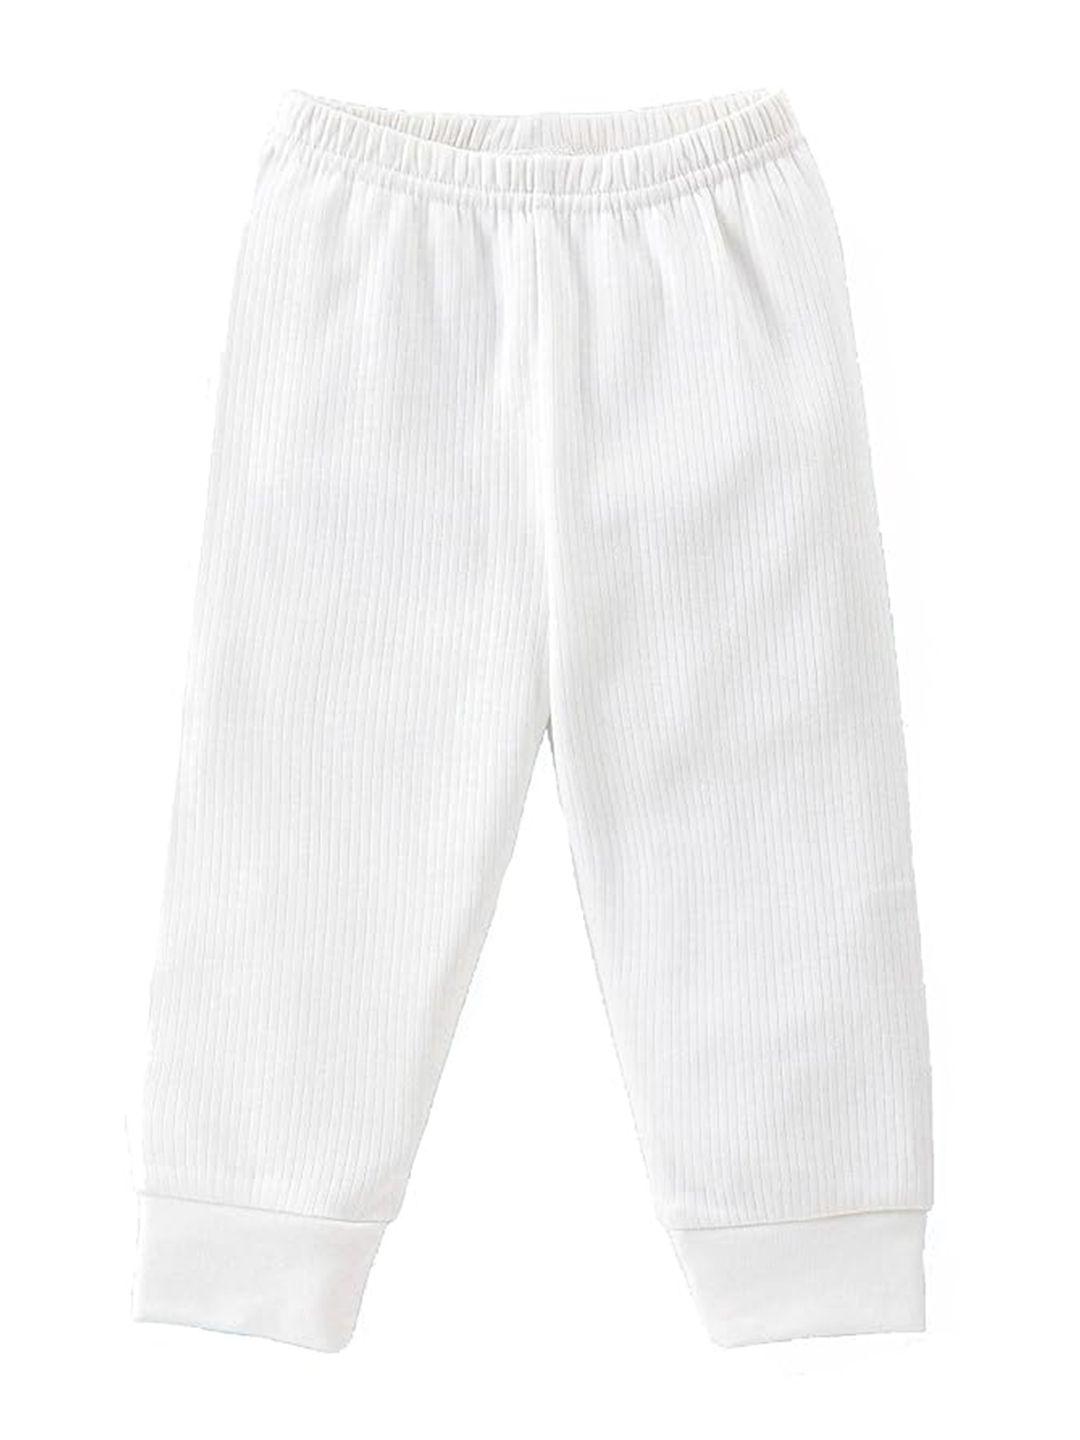 baesd infants cotton thermal bottoms